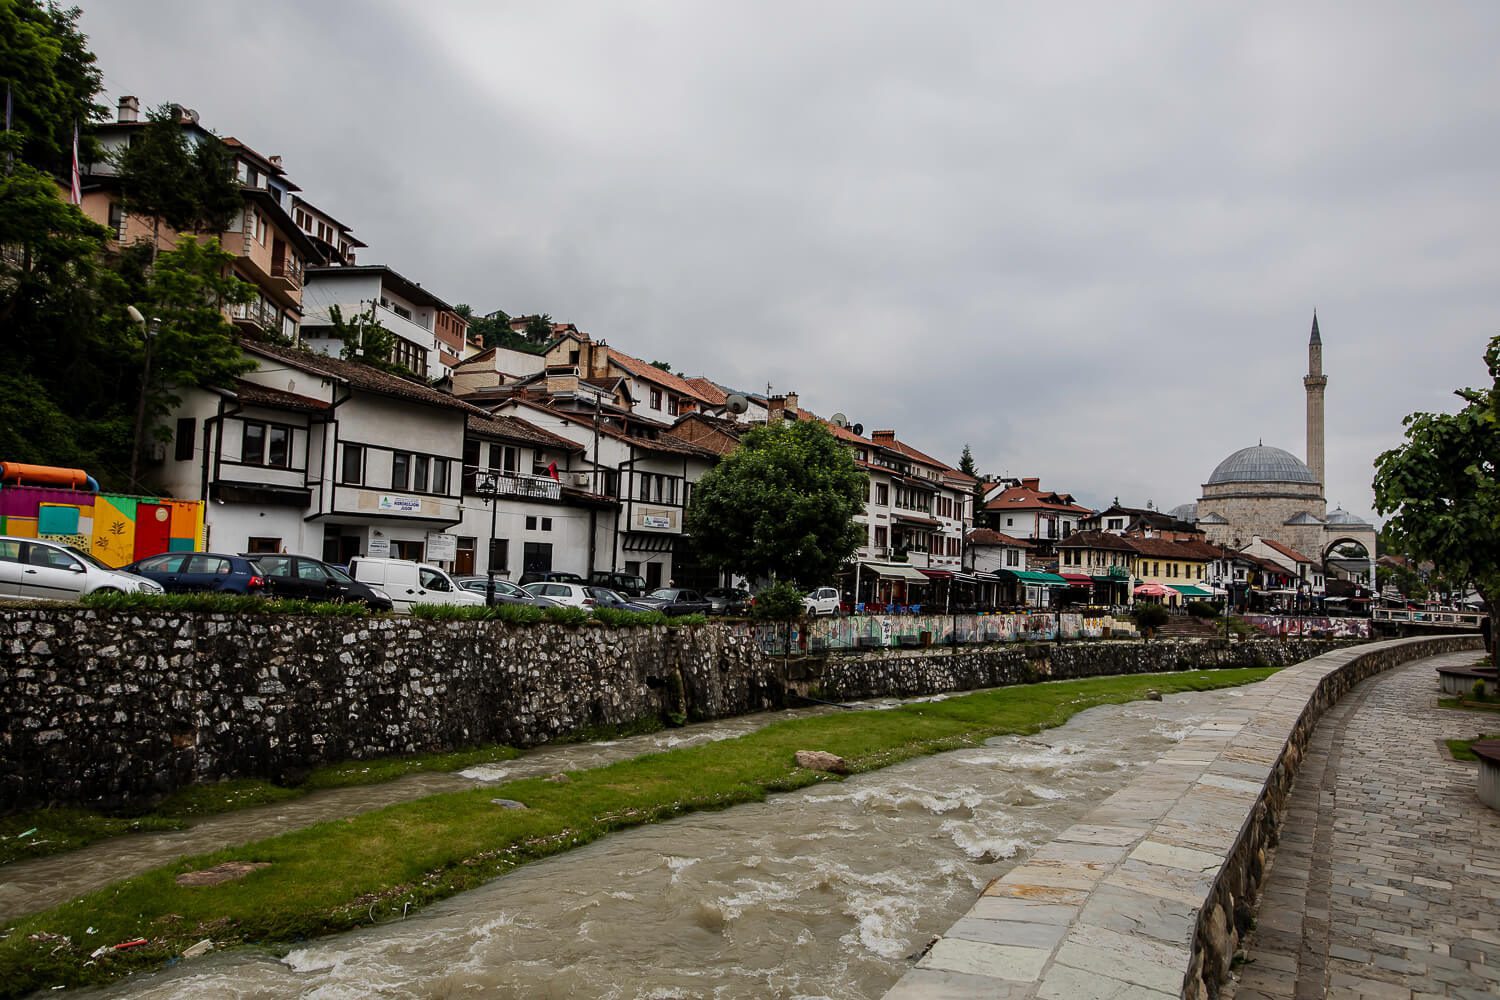 Things to do in Prizren